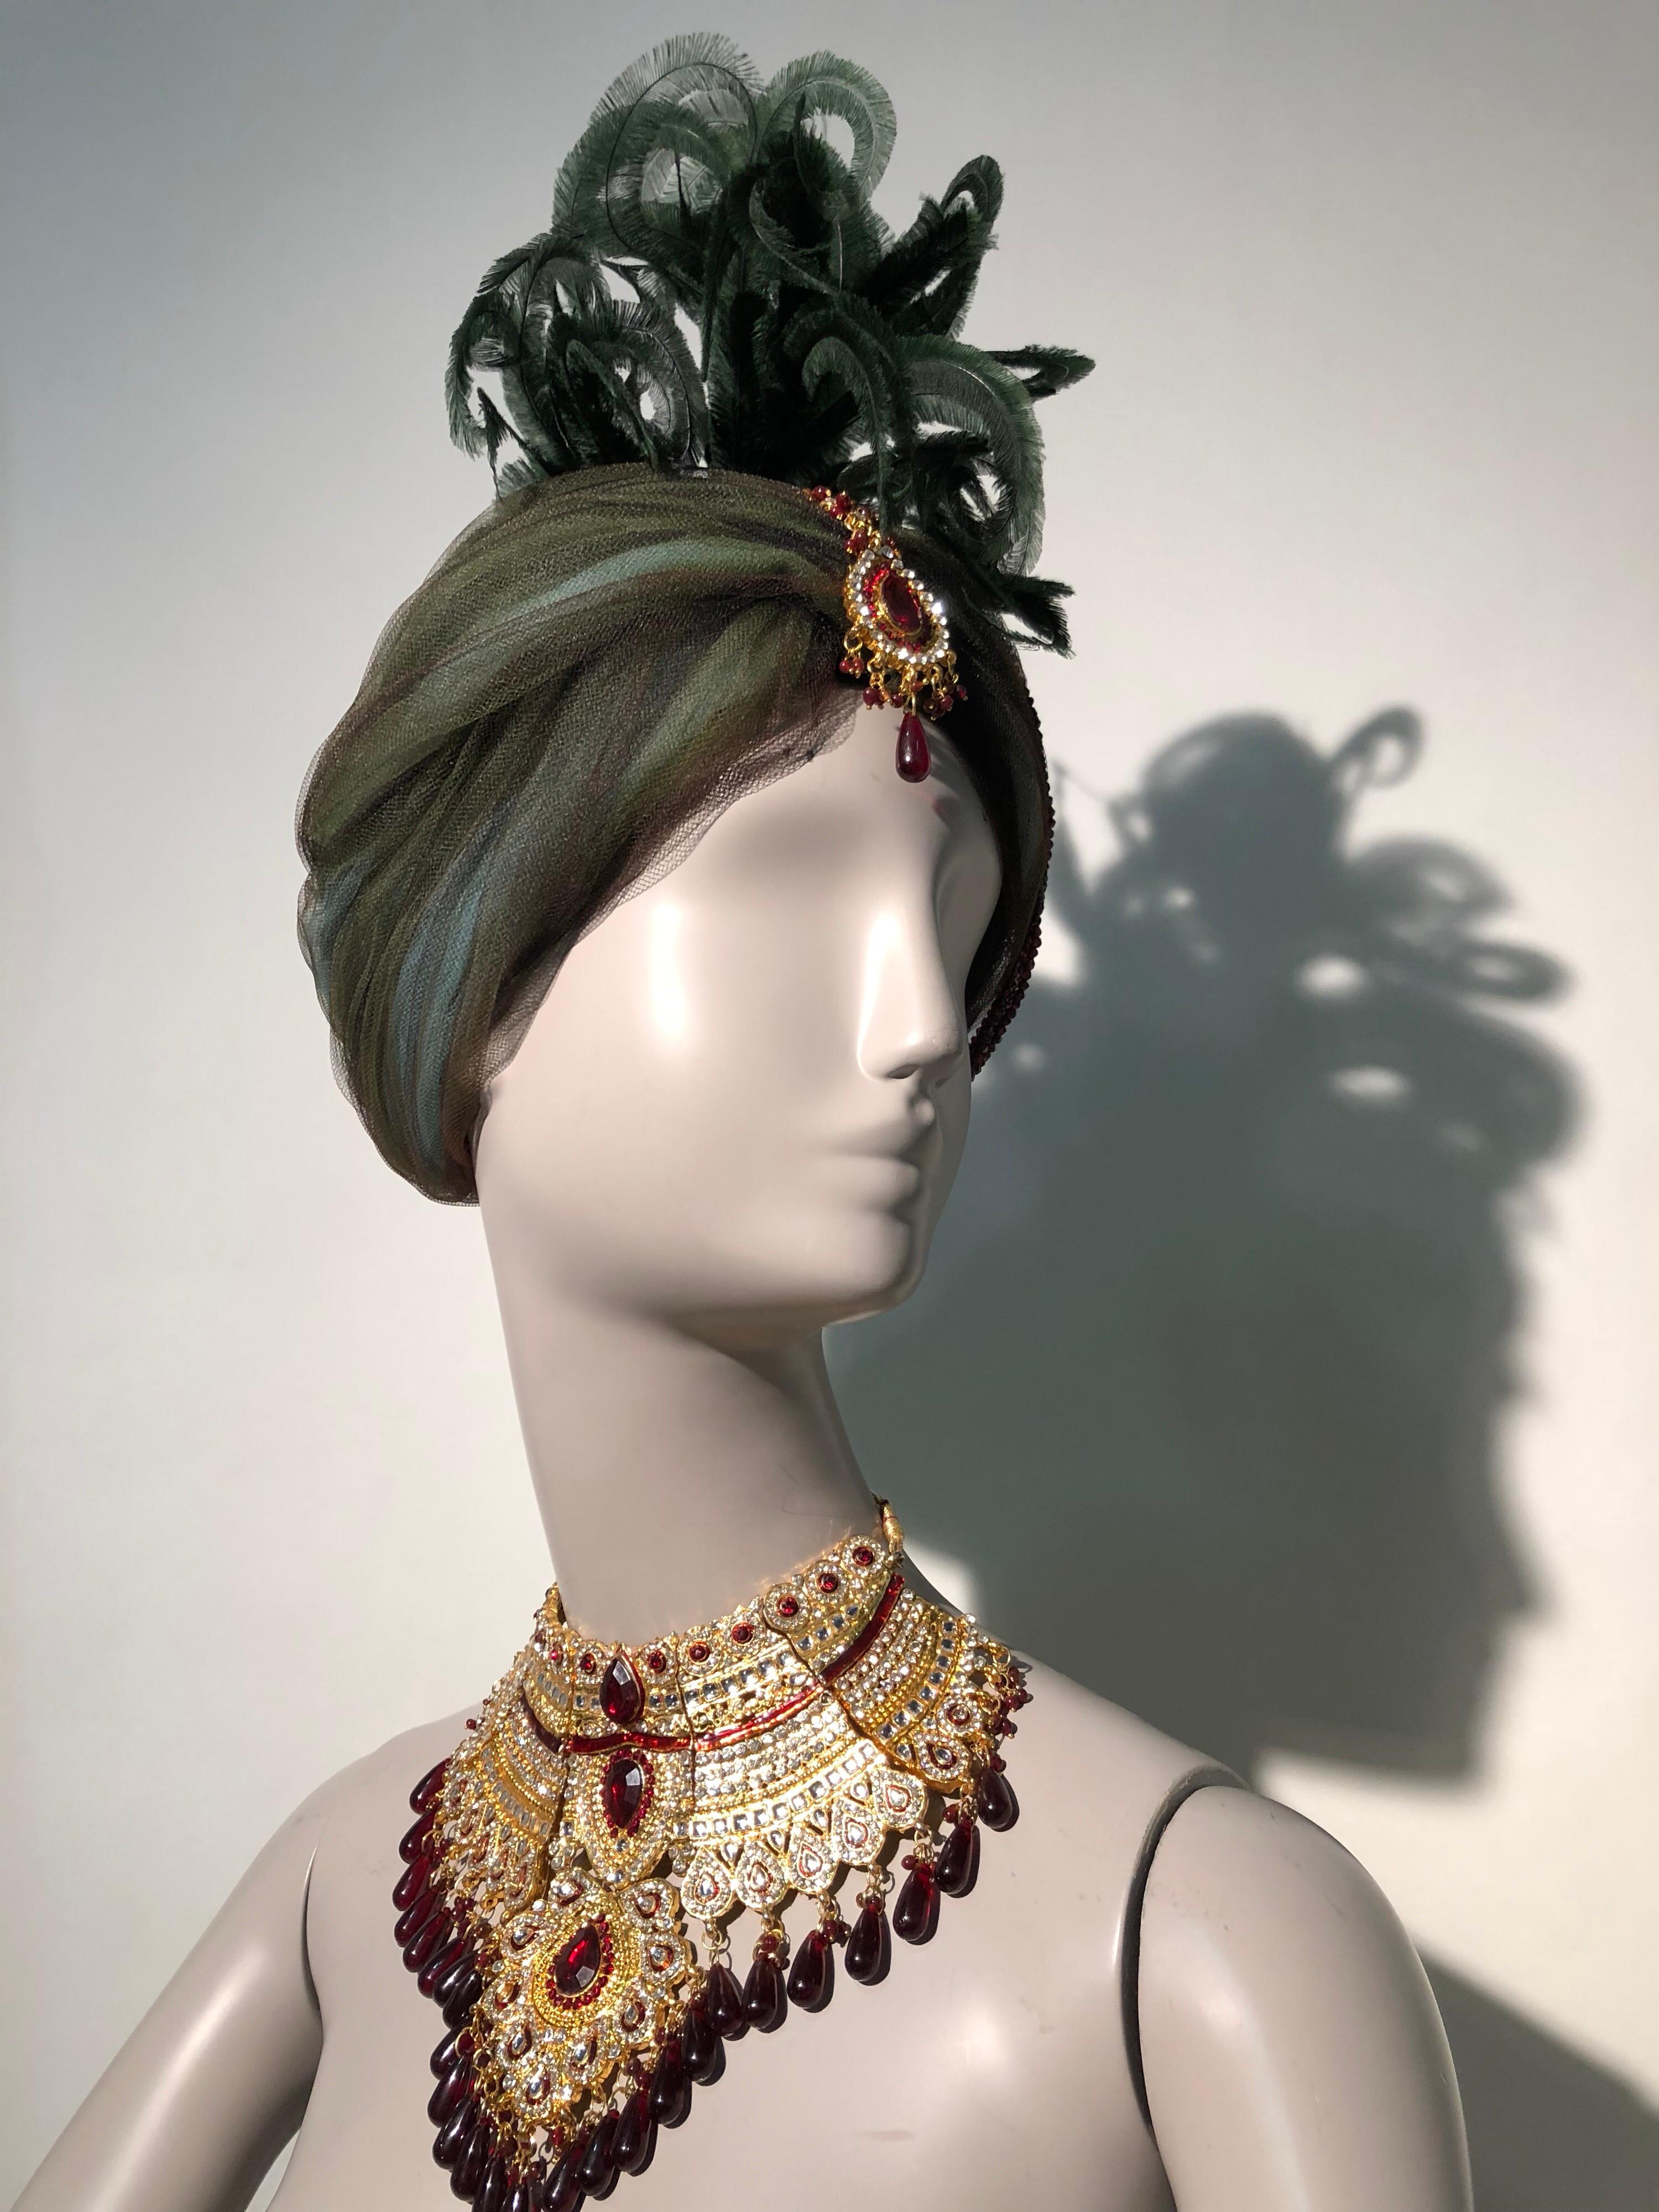 Gray Tulle Turban With Curled Feathers and Authentic Indian Bib Necklace, 1960s 